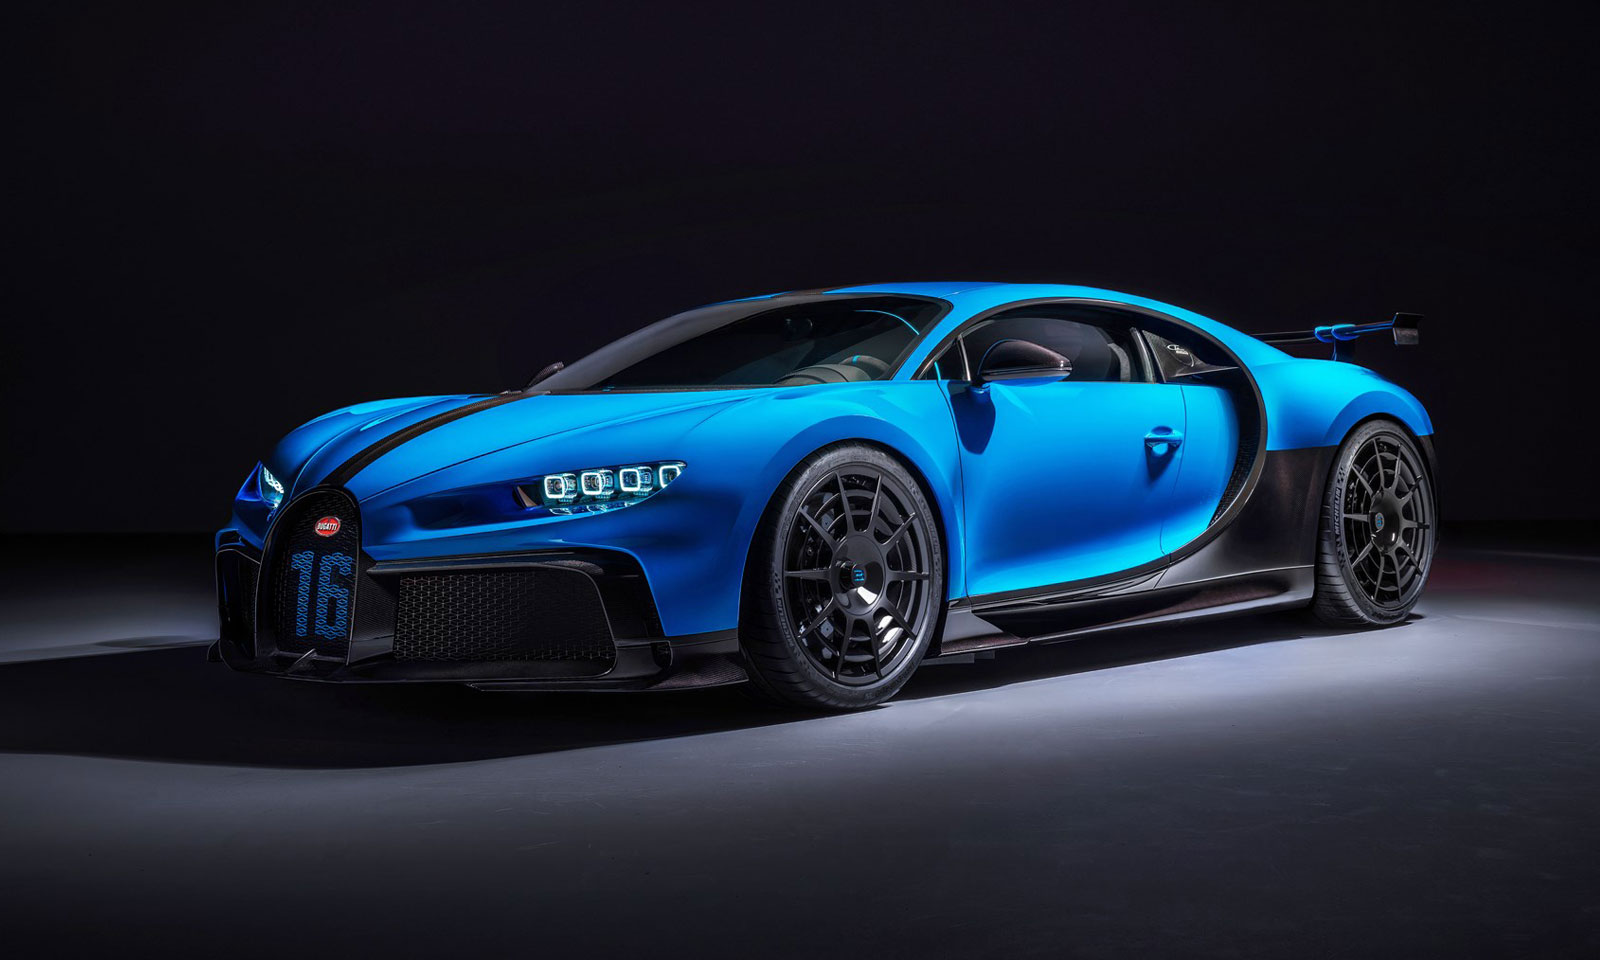 Jacob & Co. x Bugatti Chiron Tourbillon is the first all-new timepiece of this partnership